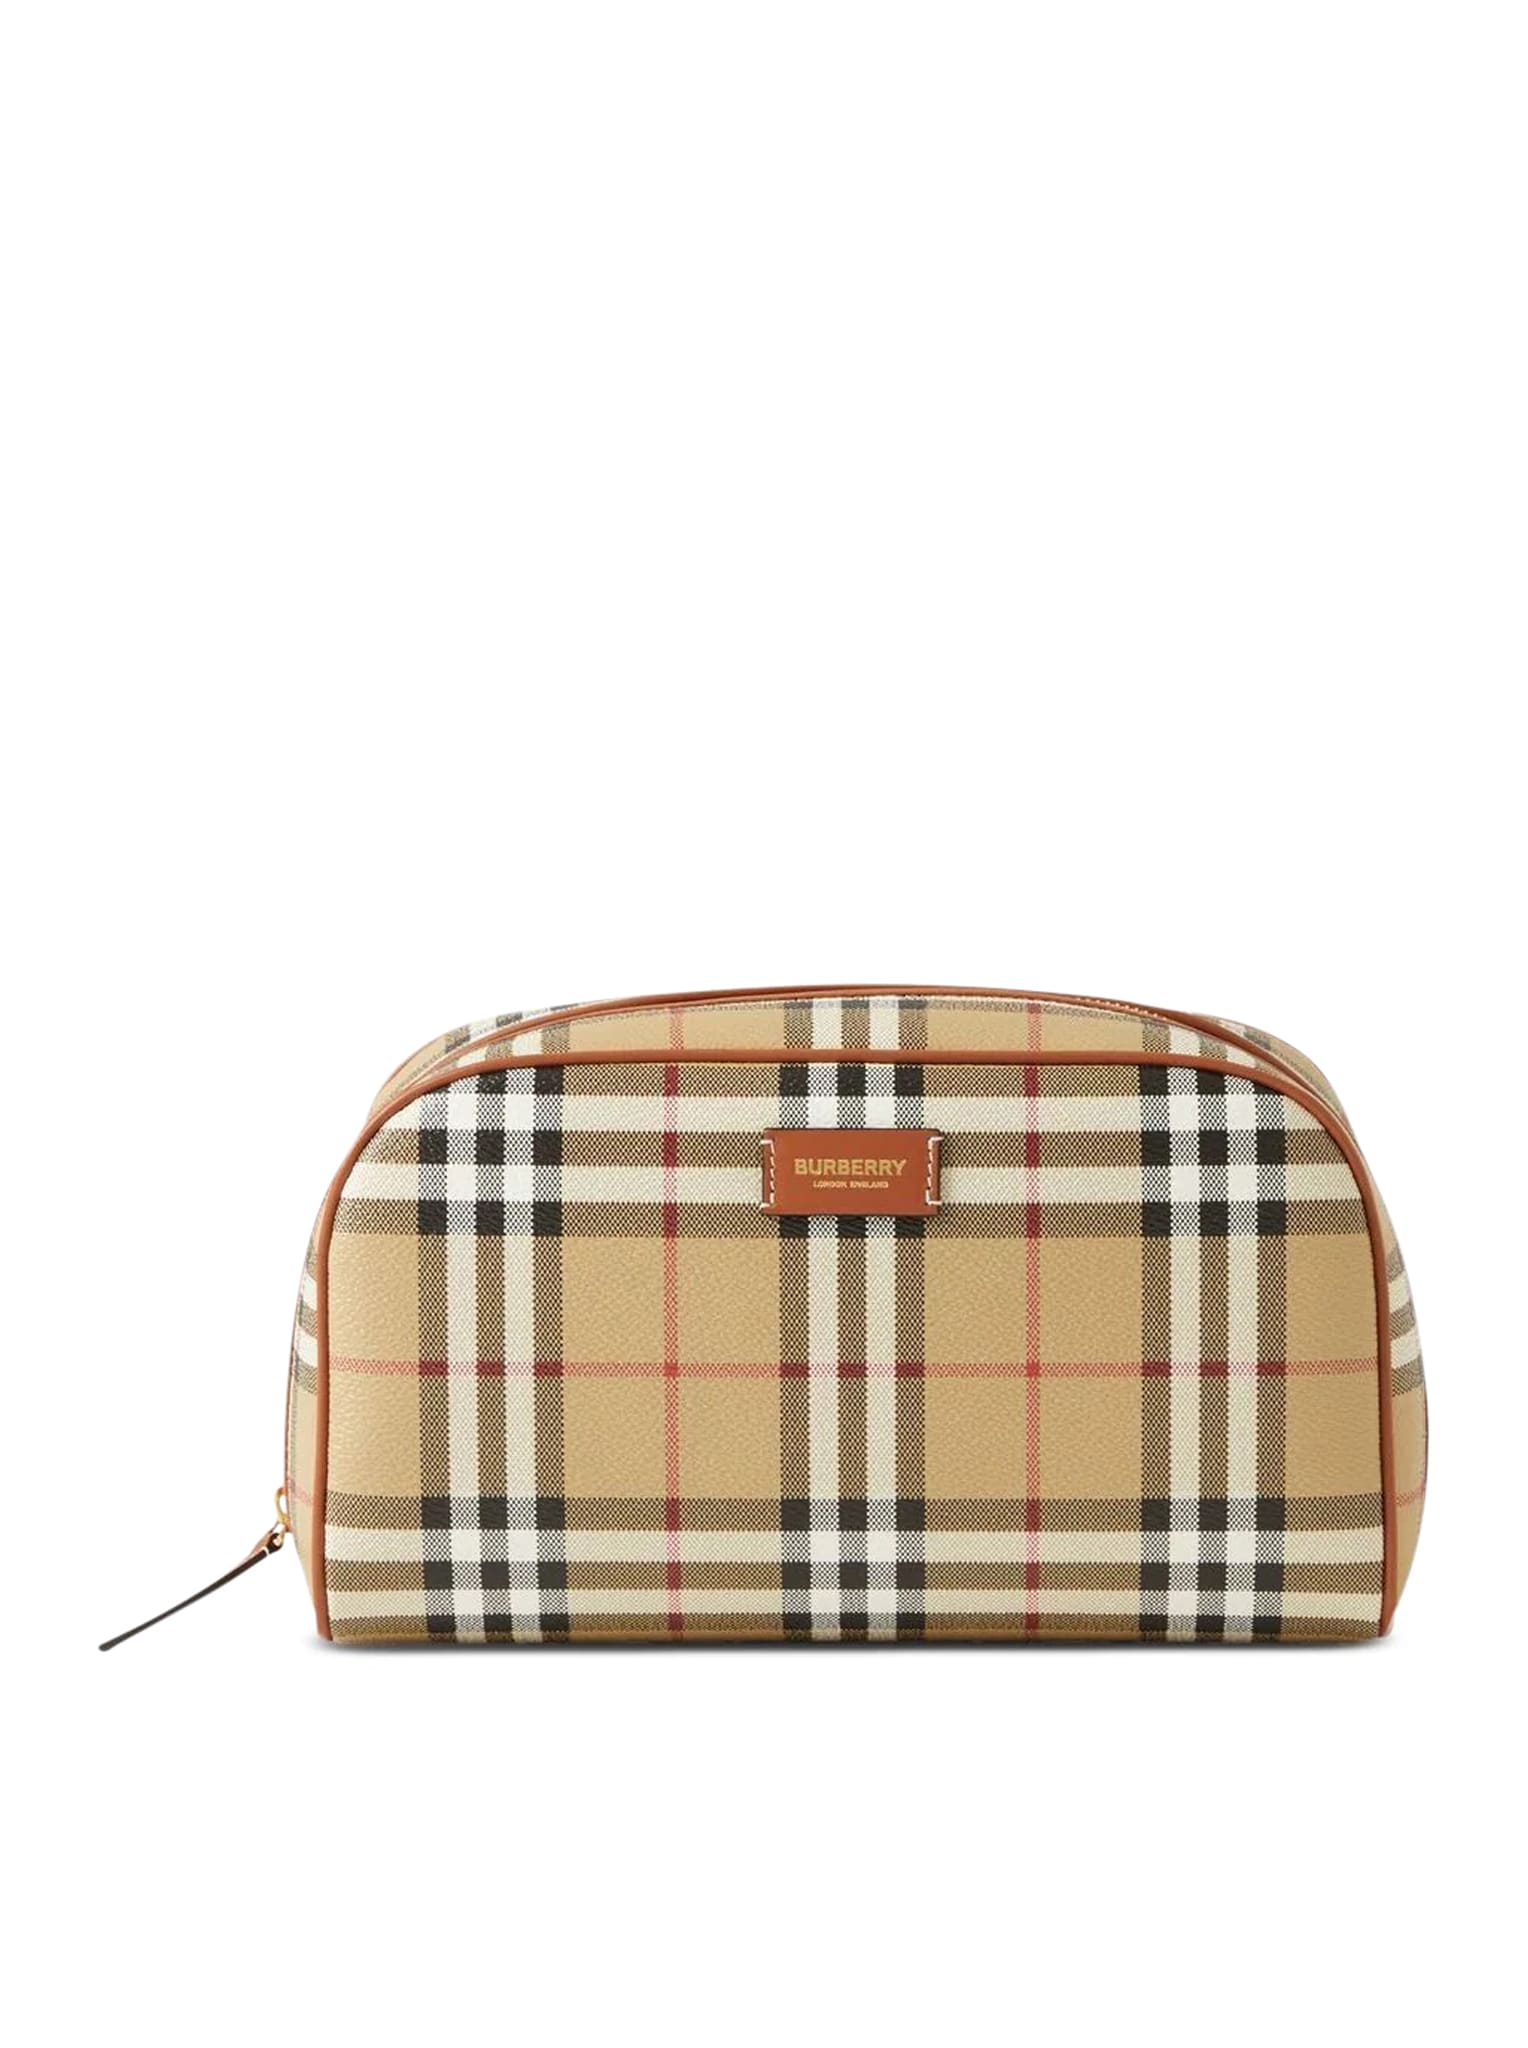 Burberry Ls Md Cosmetic Pouch Dfc